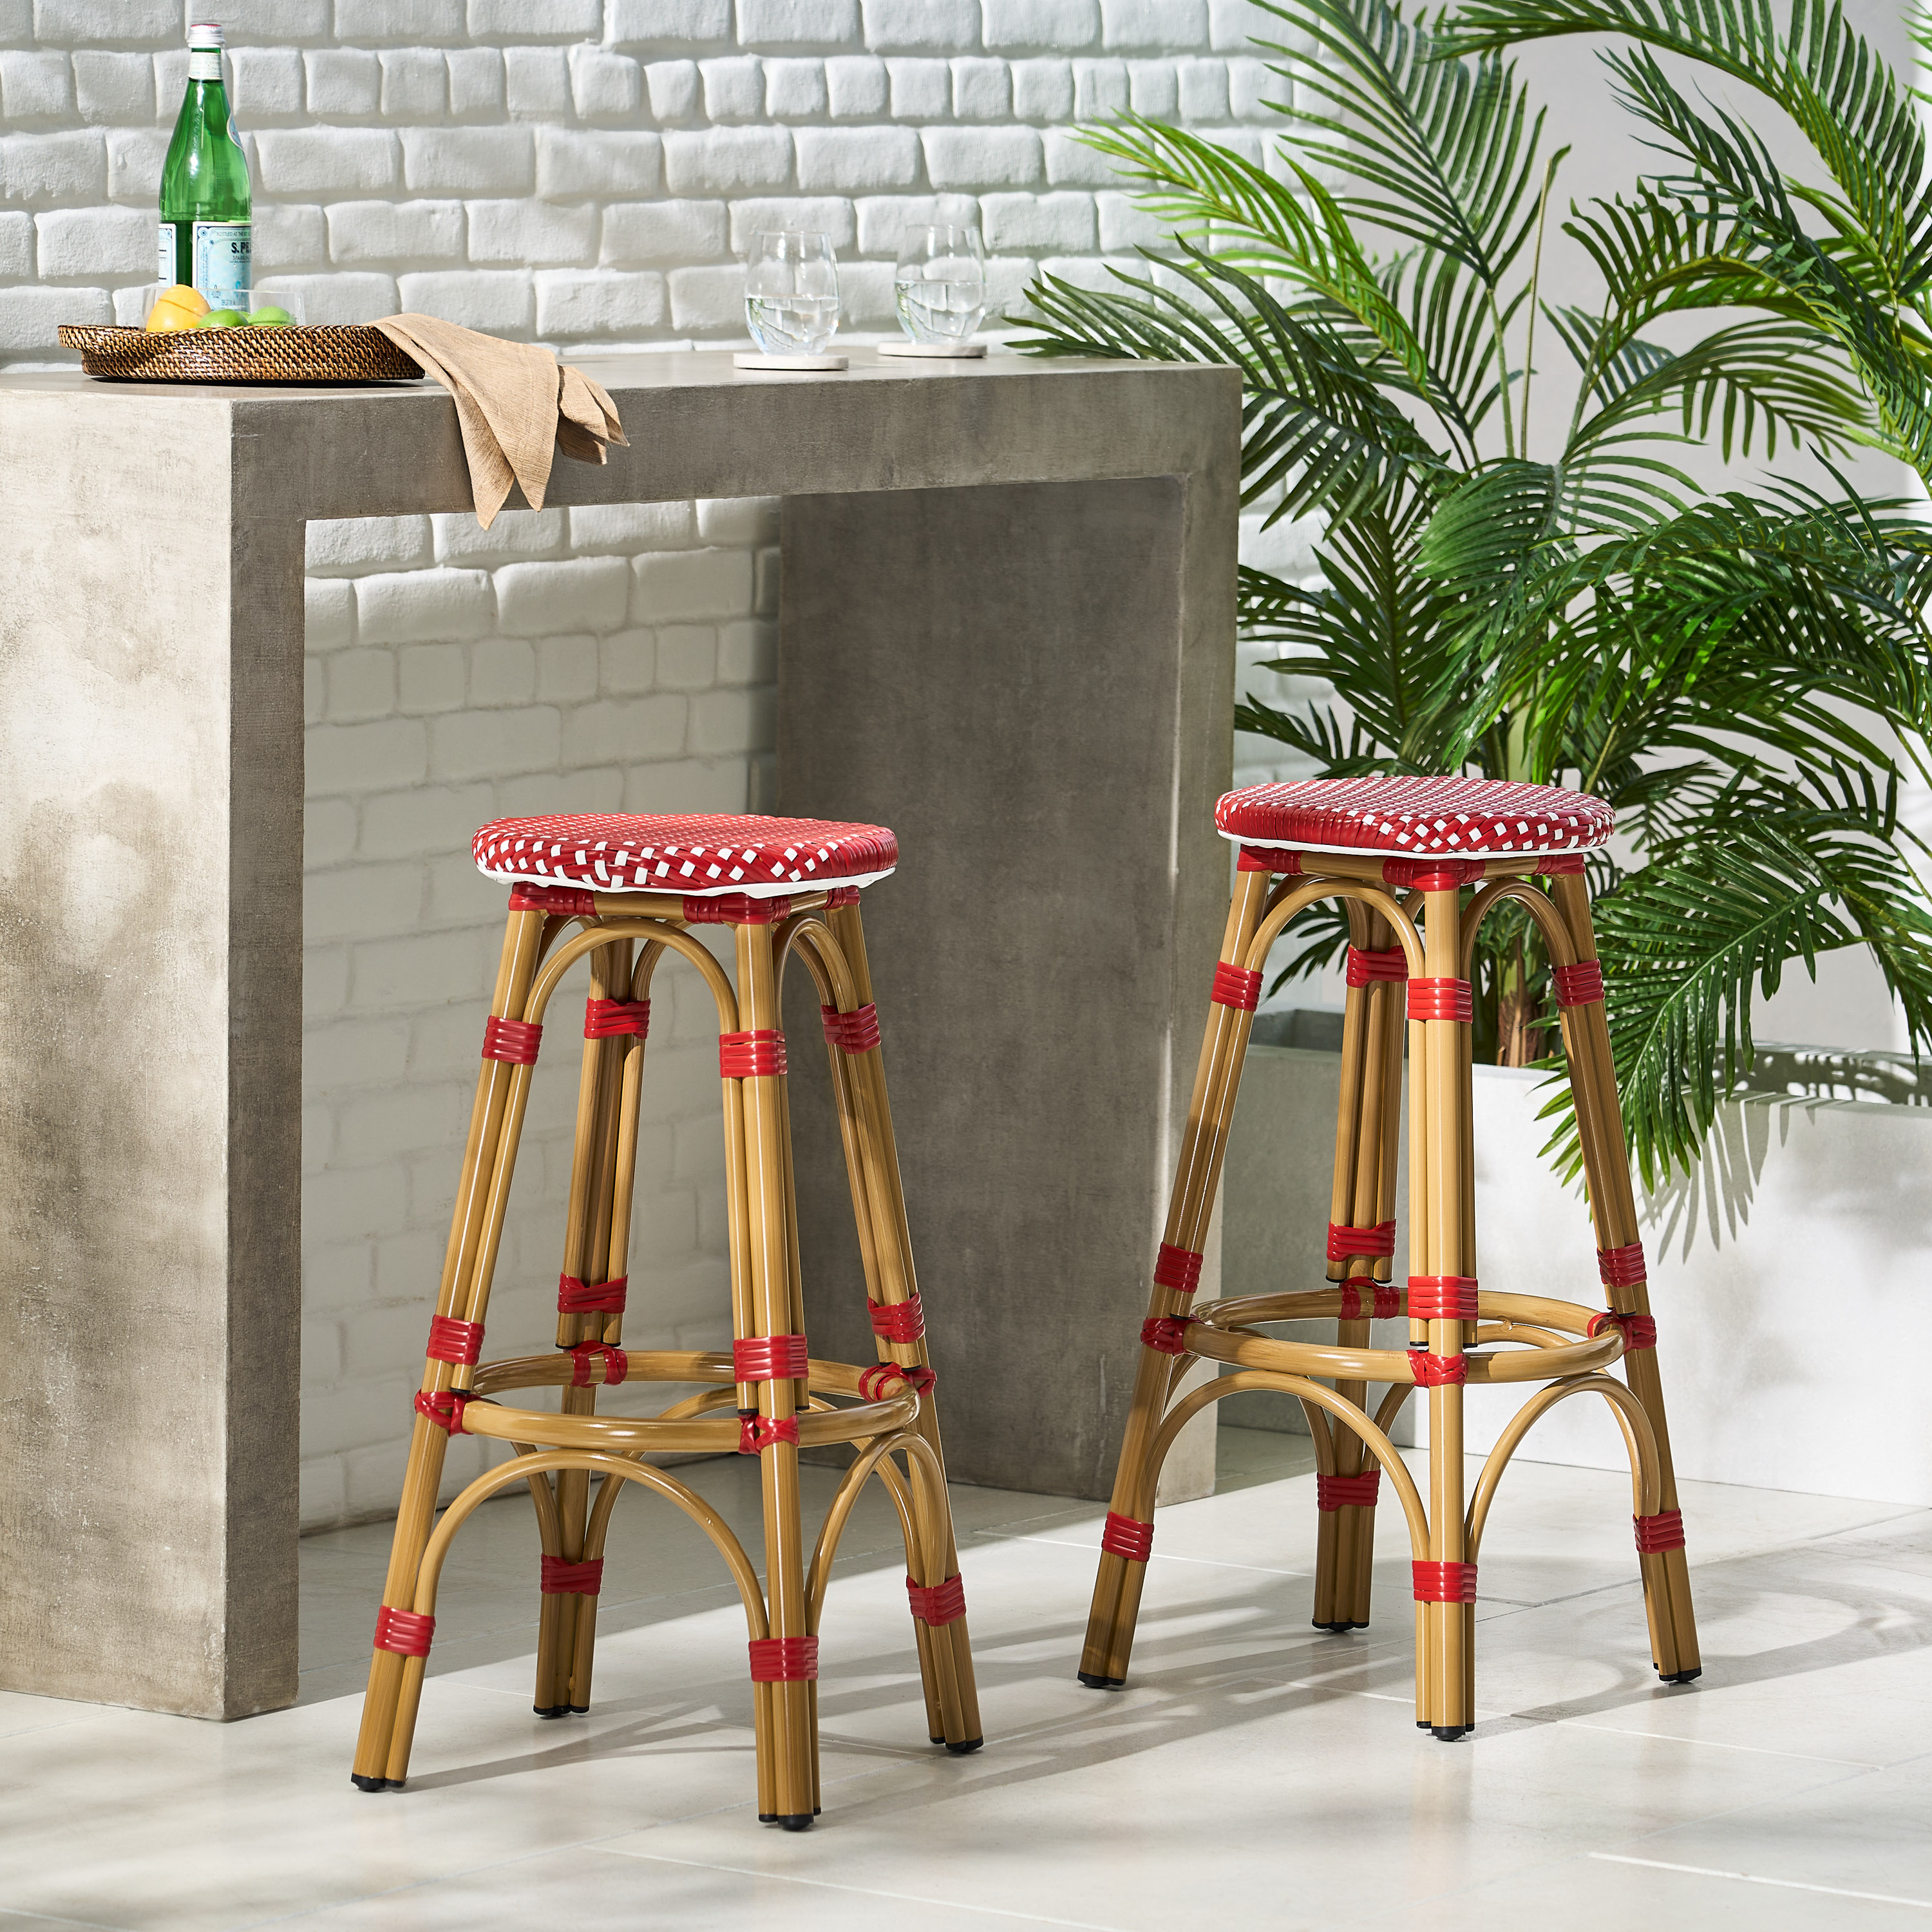 Wilbur Aluminum and Wicker Outdoor 29.5 Inch Barstools, Set of 2, Red, White, and Bamboo Finish - image 1 of 7